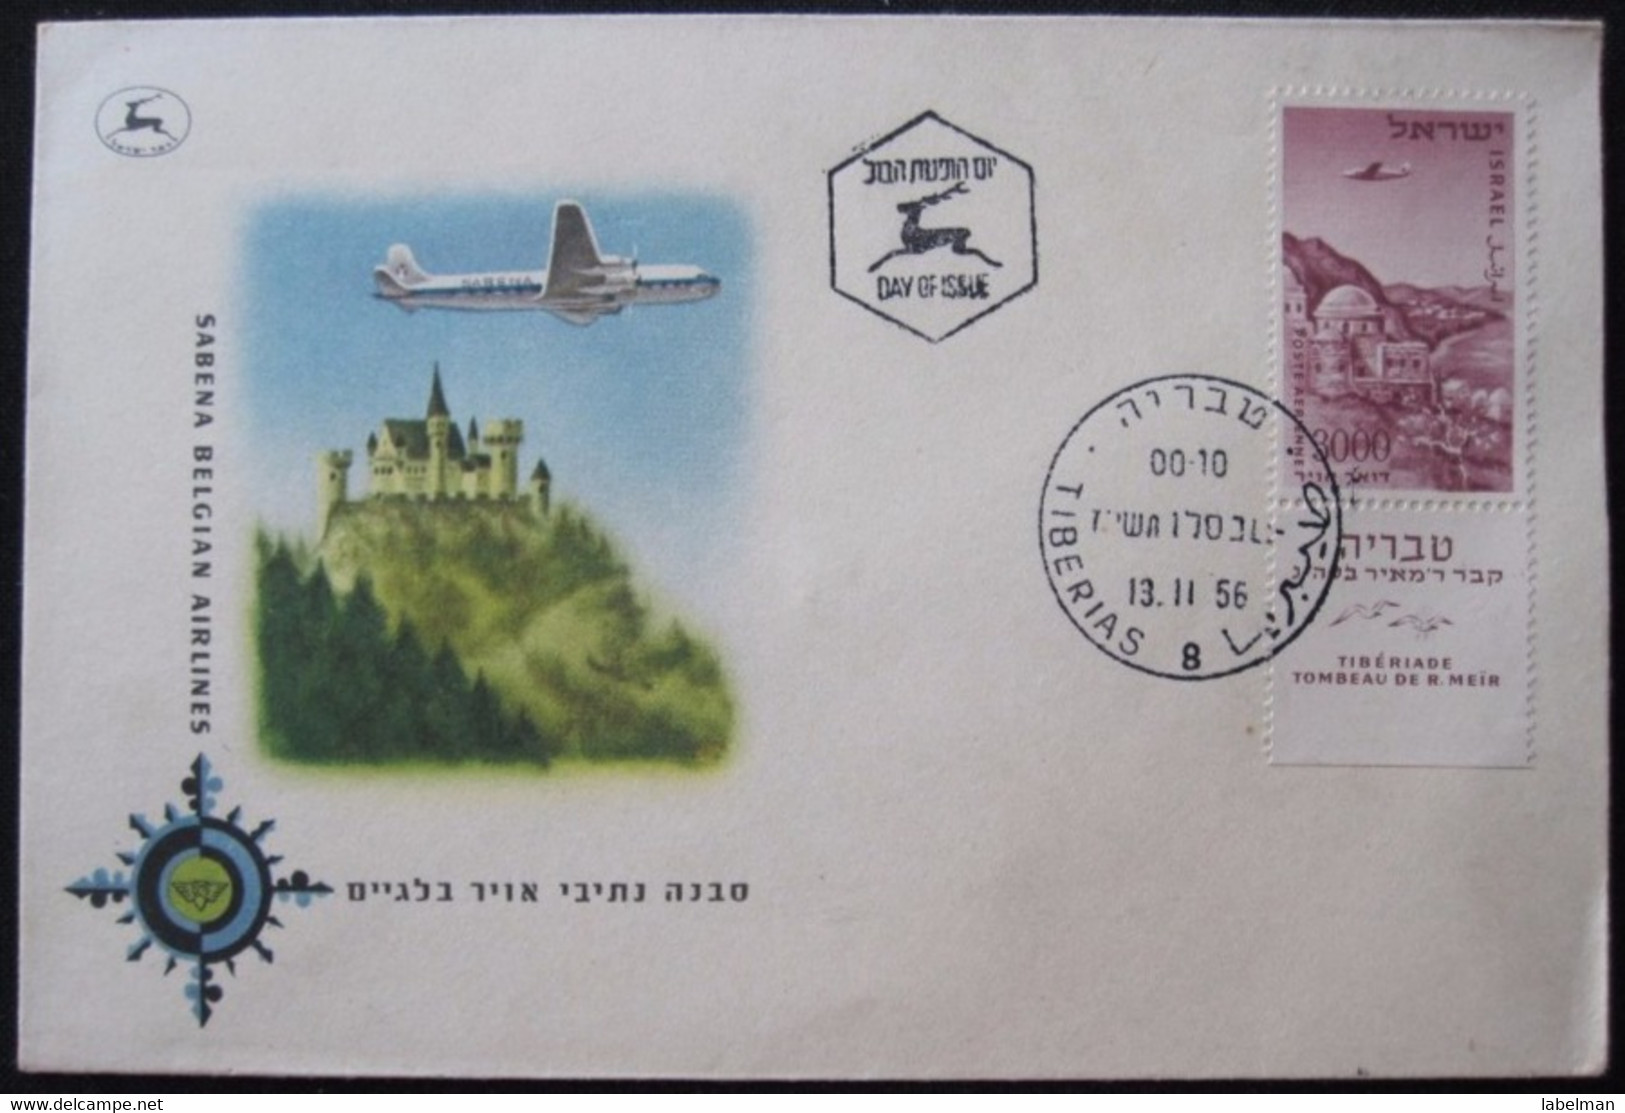 1956 PLANE SABENA AIRLINES BELGIUM TIBERIAS FIRST DAY ISSUE JOUR D'EMISSION AIR MAIL POST STAMP ENVELOPE ISRAEL JUDAICA - Used Stamps (with Tabs)